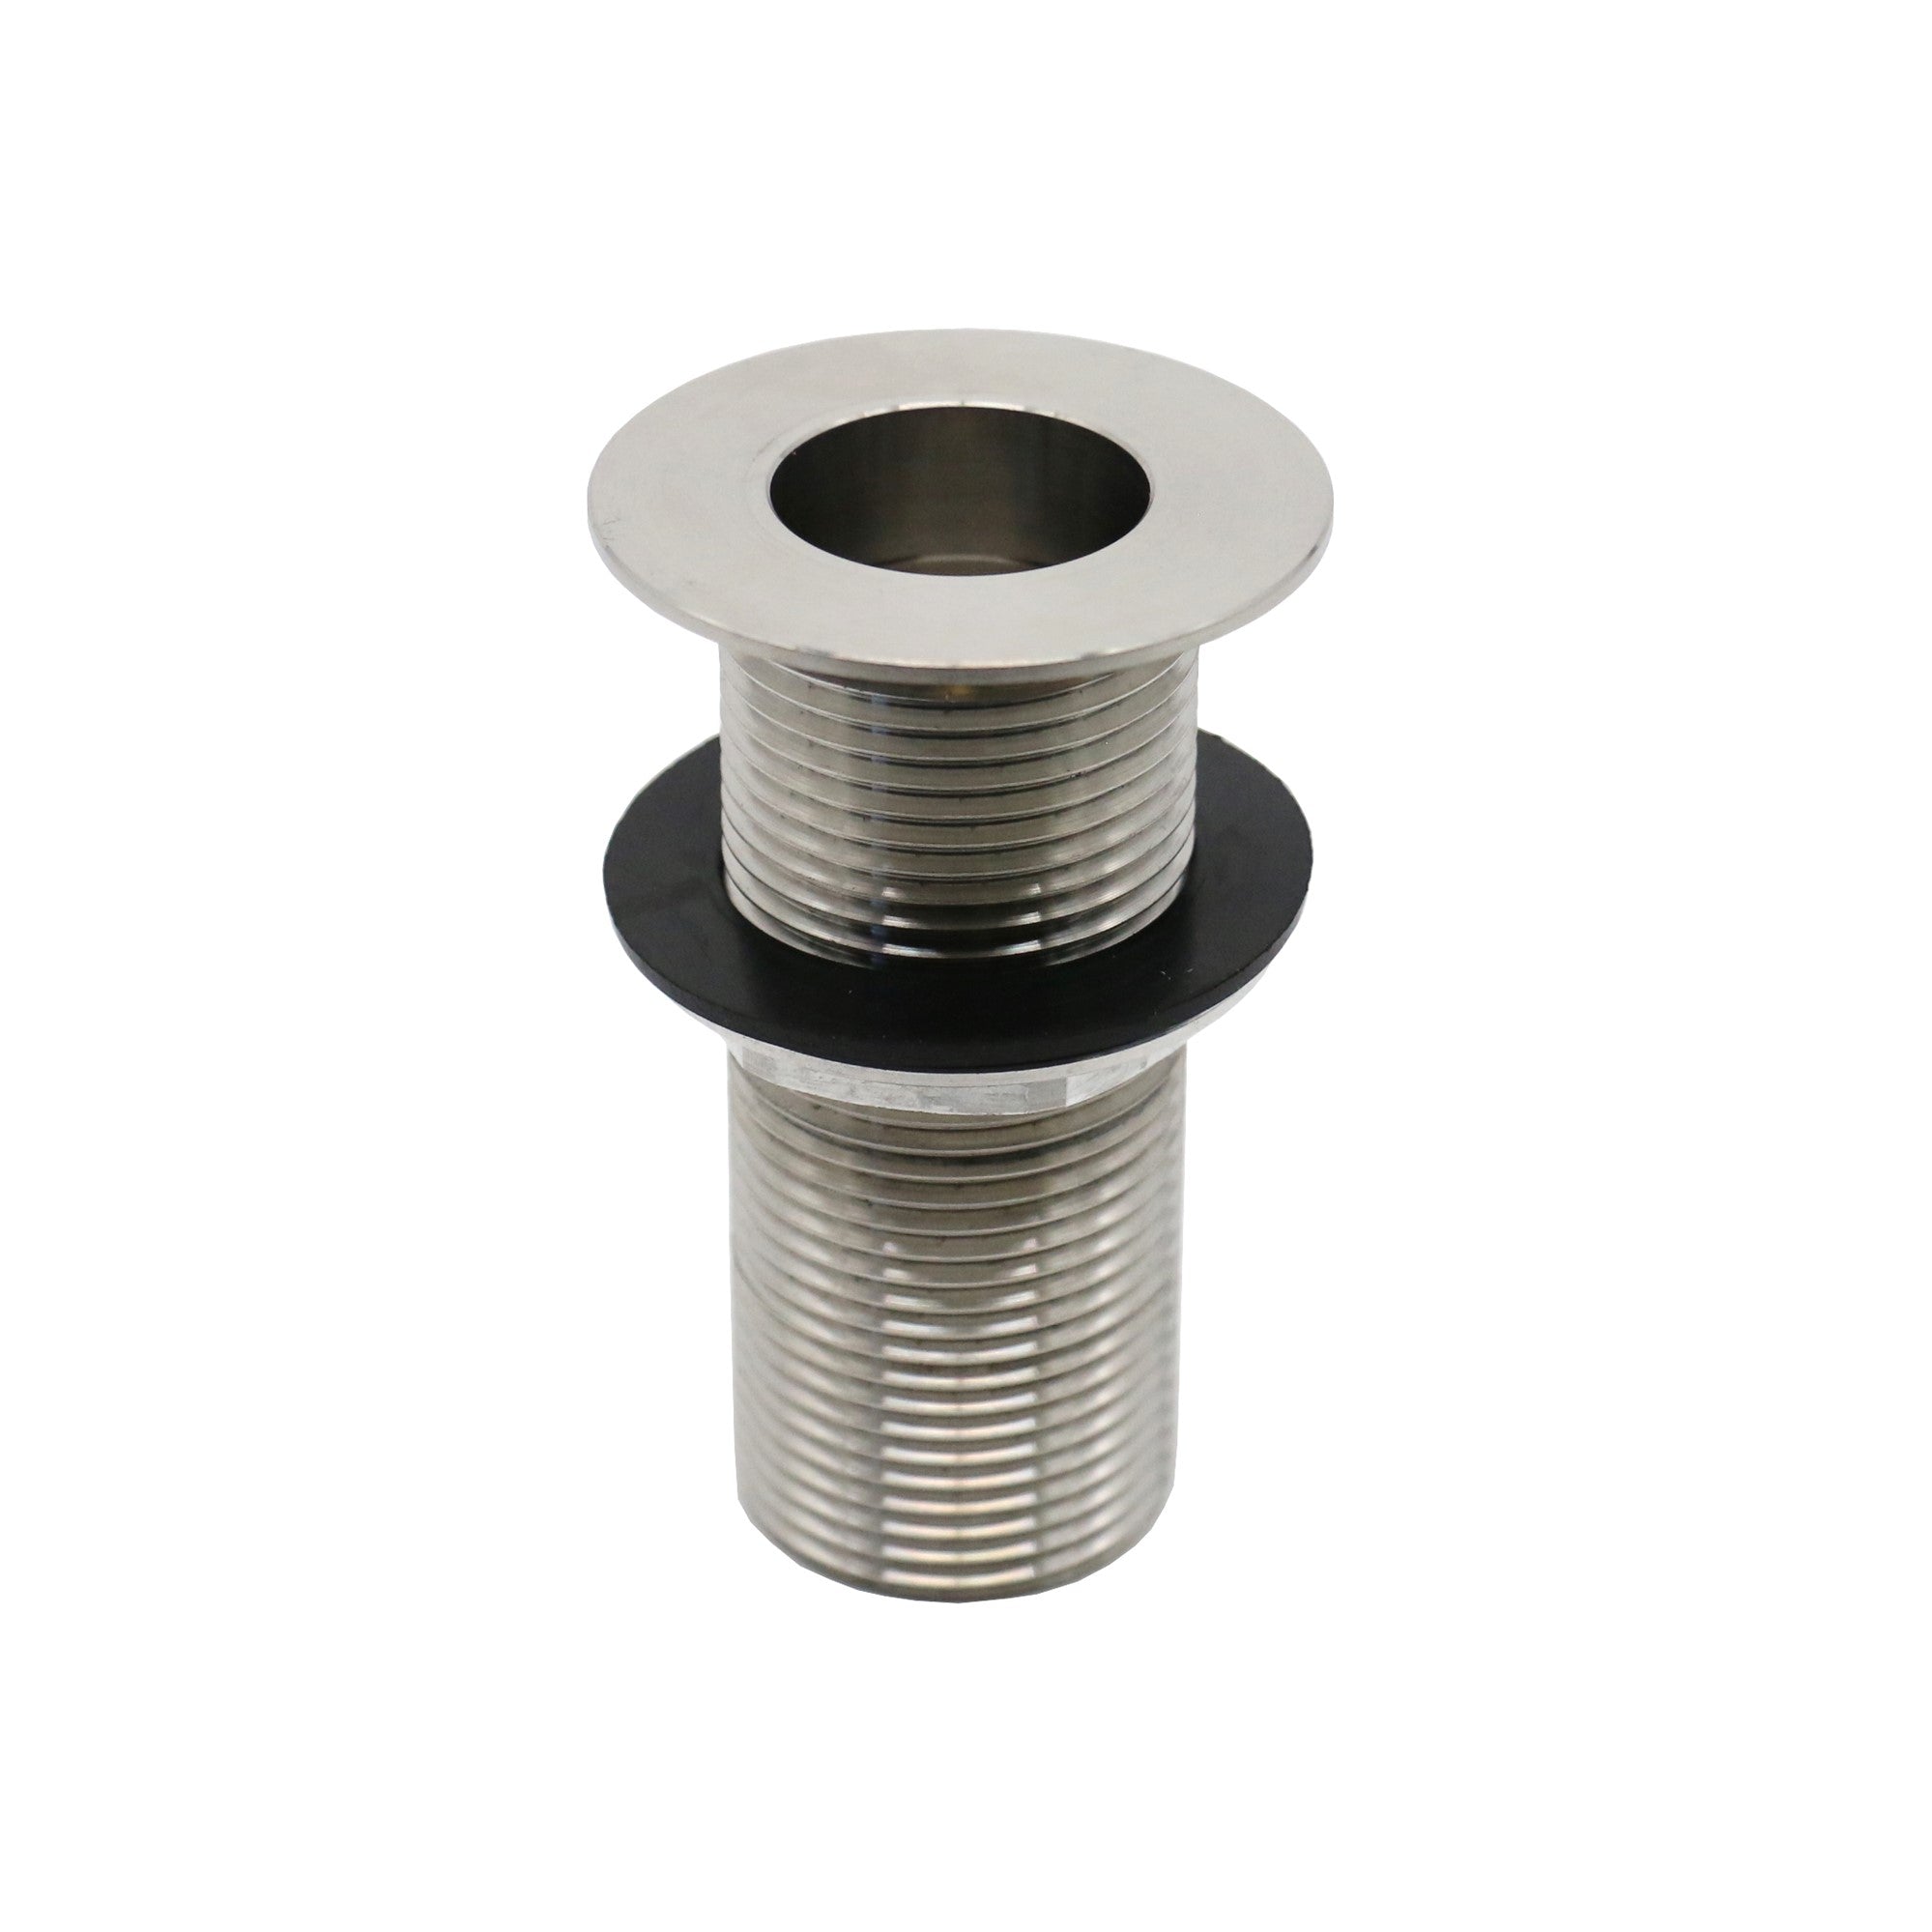 Leyso AA-144 Stainless Steel Bar Sink Drain 1" Nominal Pipe Size 1" NPS Thread for 1-3/8" Sink Opening (3-1/4" Length)